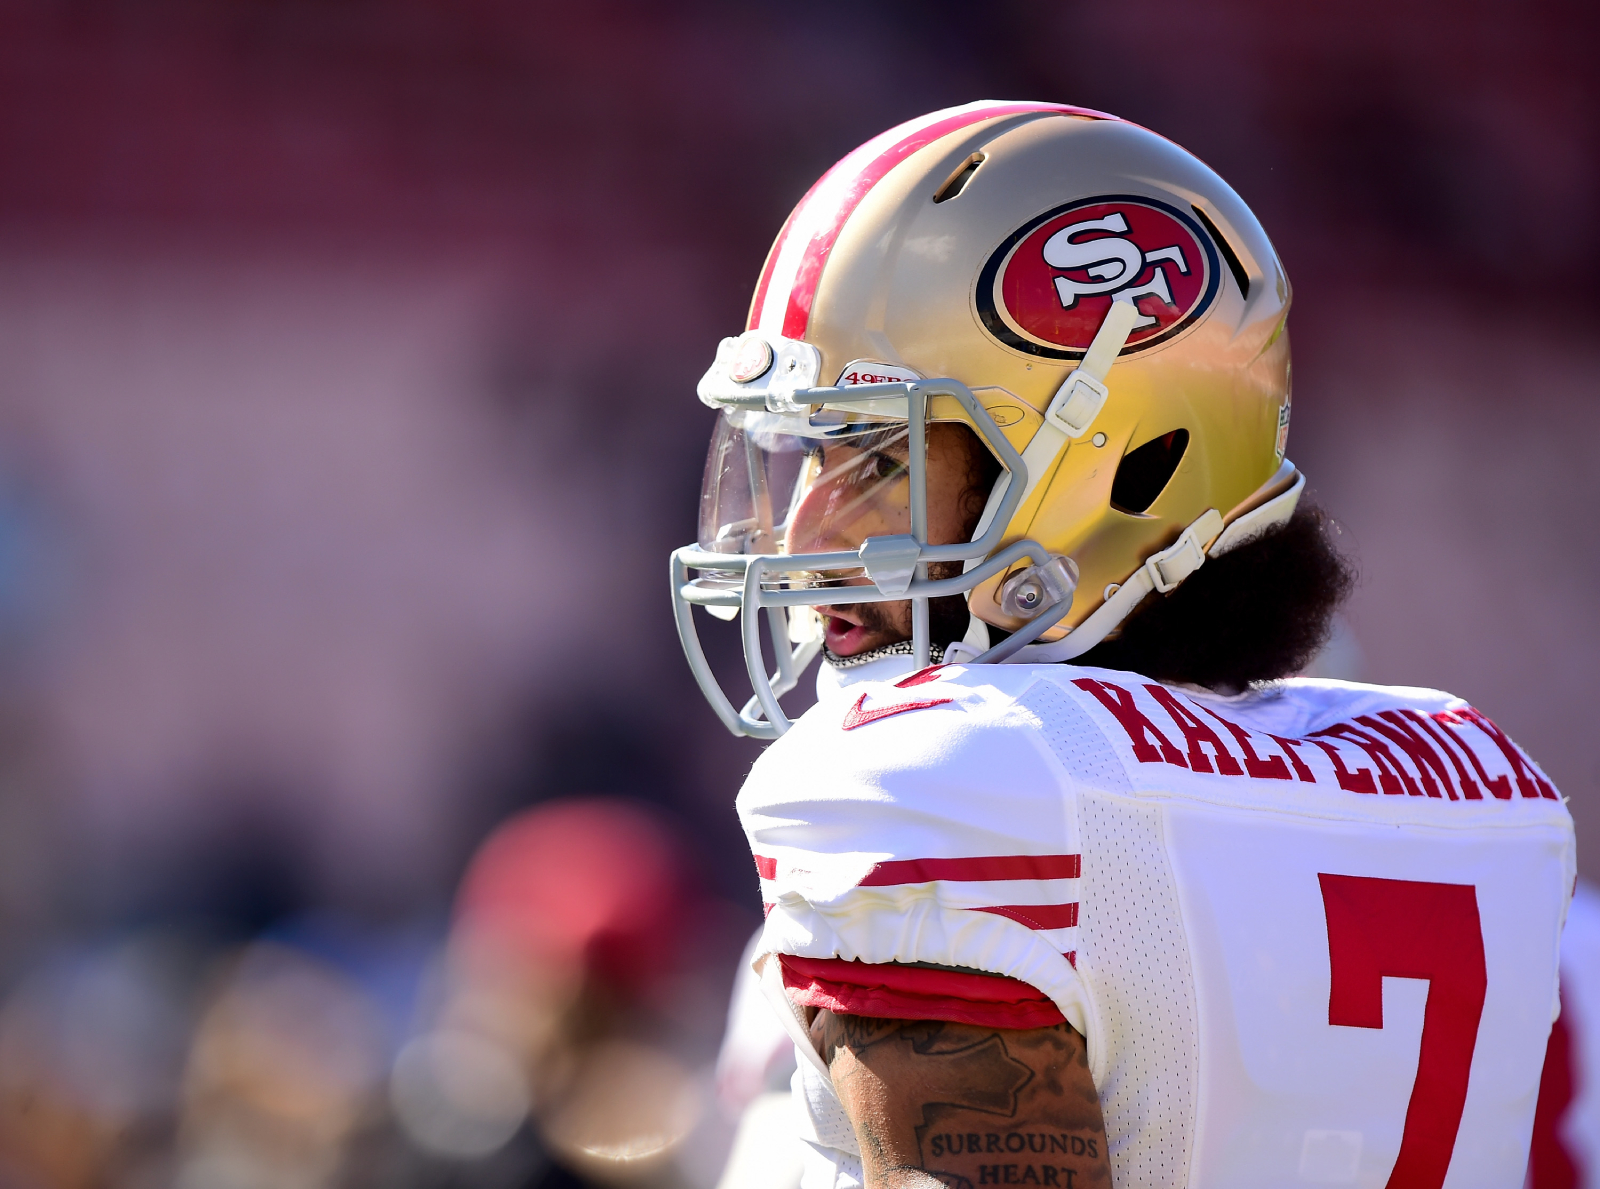 Colin Kaepernick has not played in the NFL since the 2016 season. His organization just reminded people about why he should be in the league.